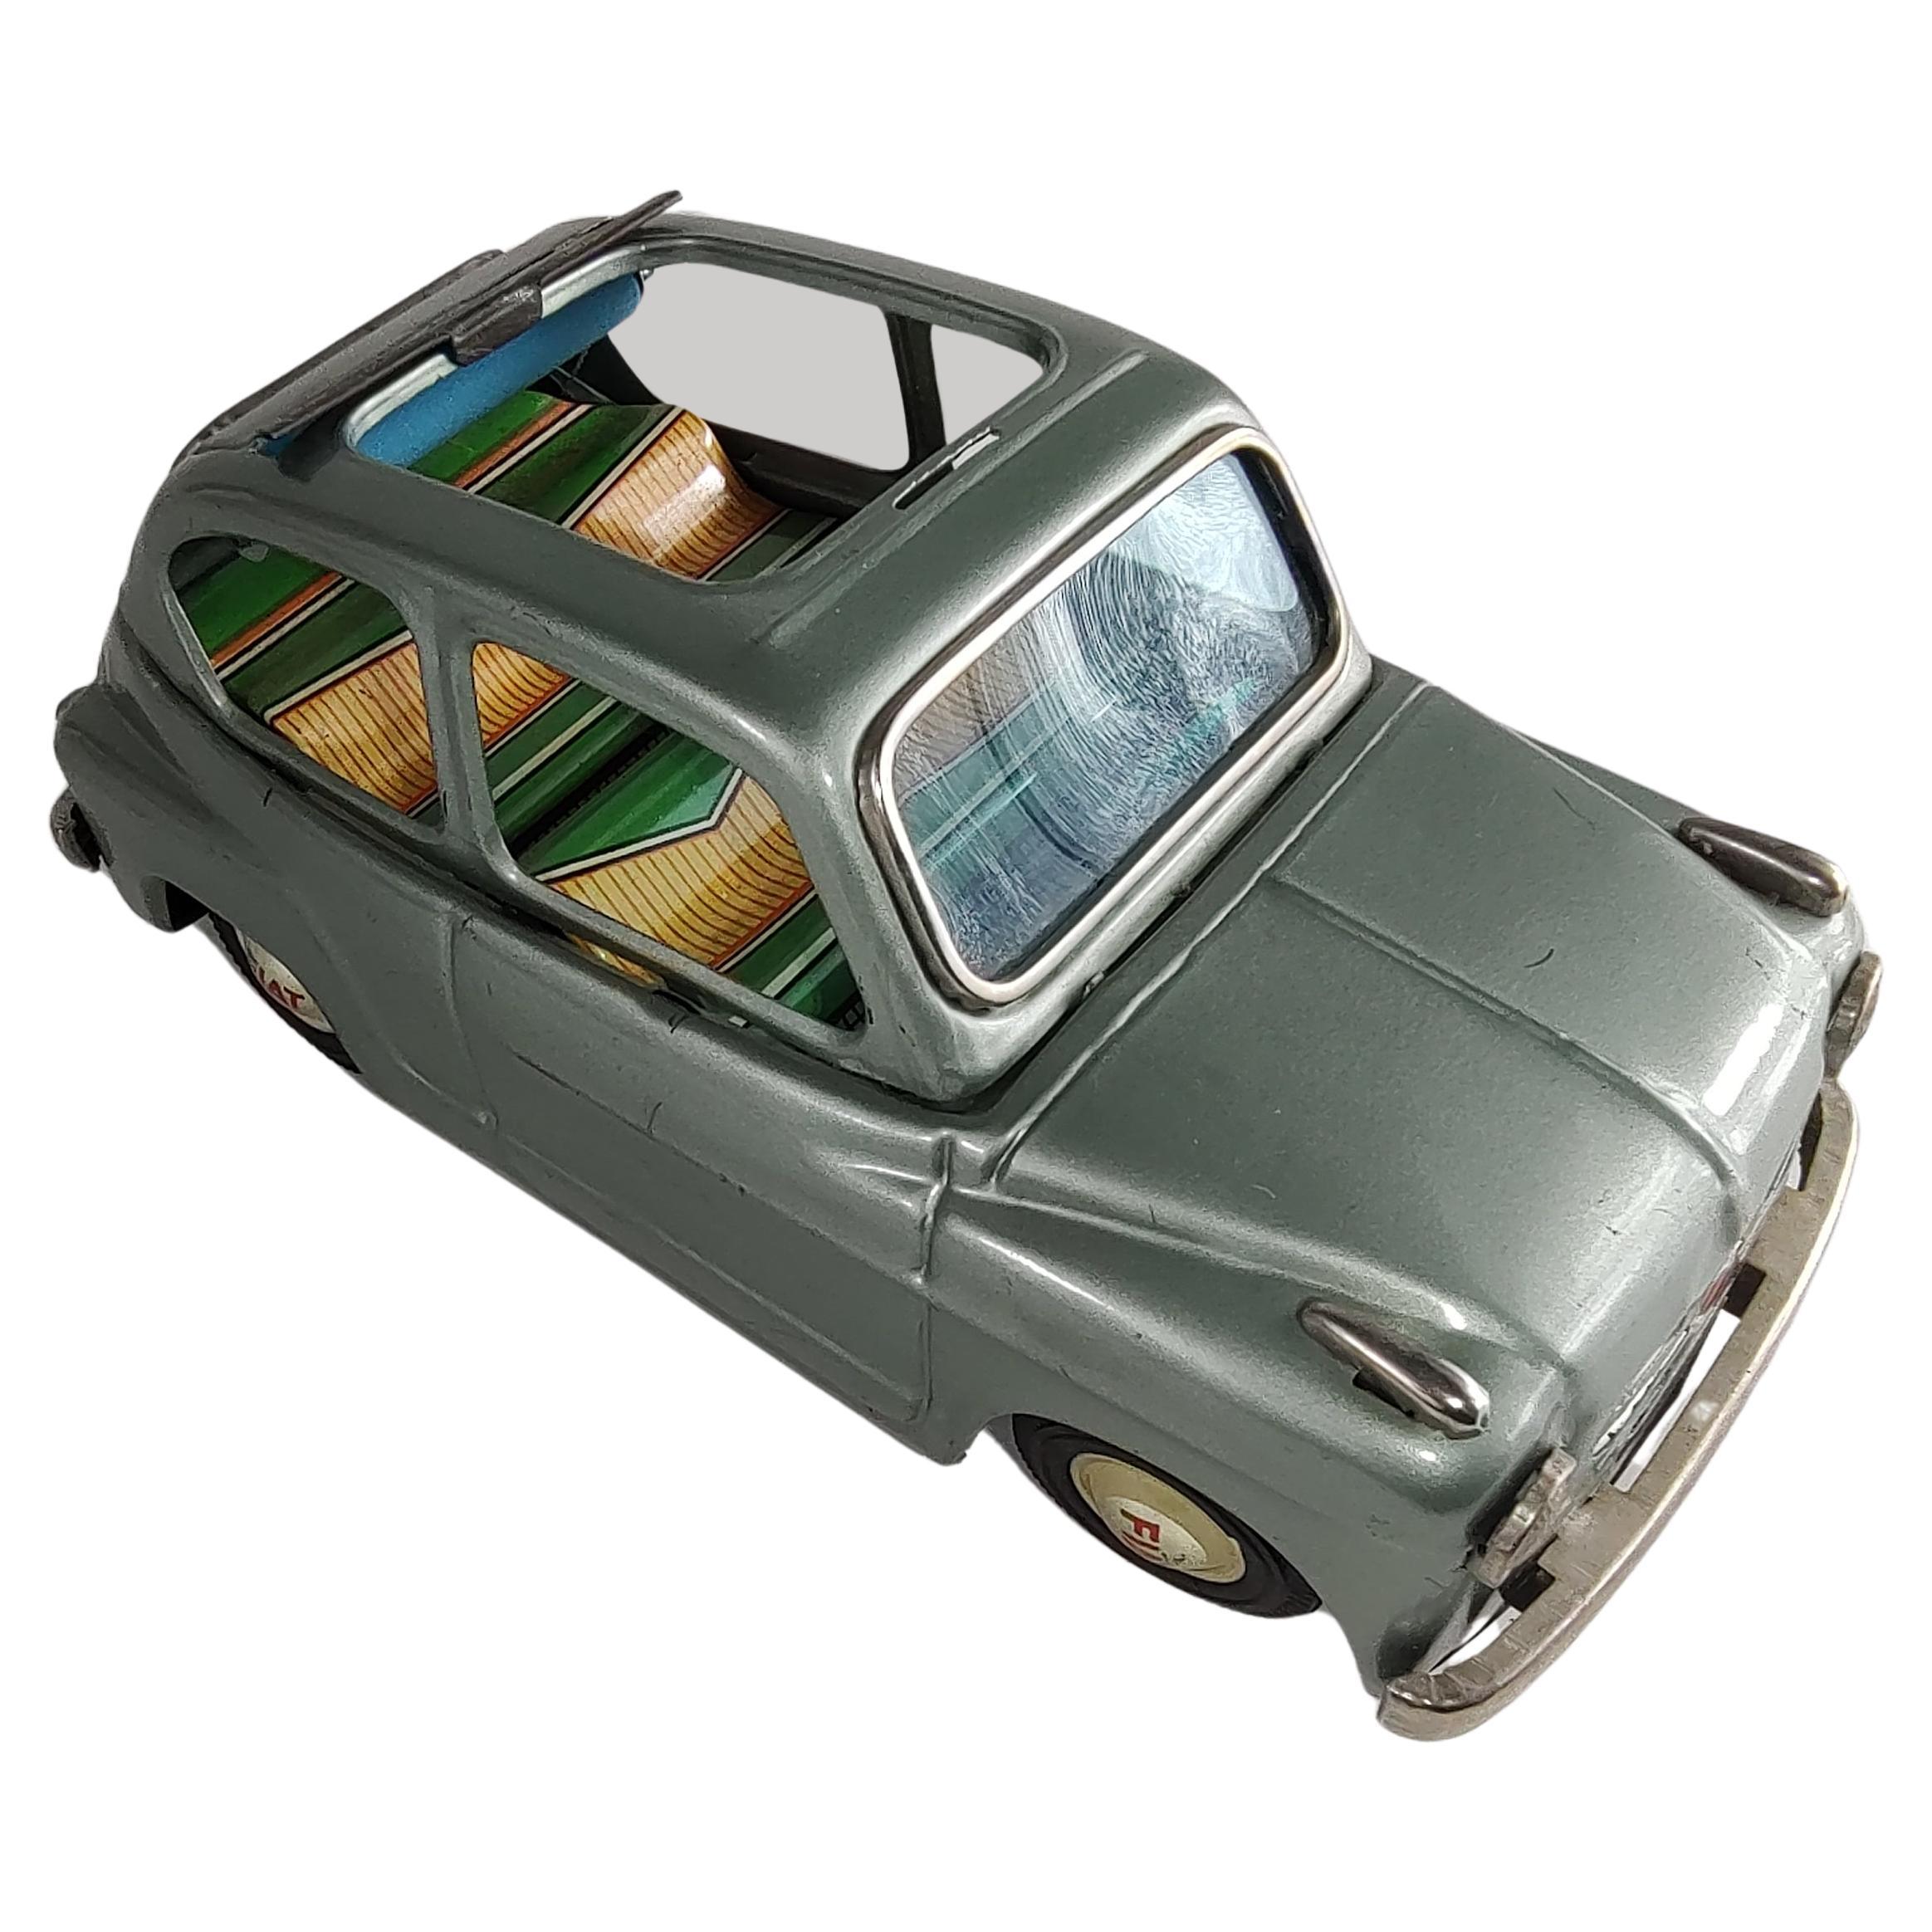 Japanese Midcentury Friction Tin Litho Soft Top Toy Car Fiat 600 by Bandai Japan For Sale